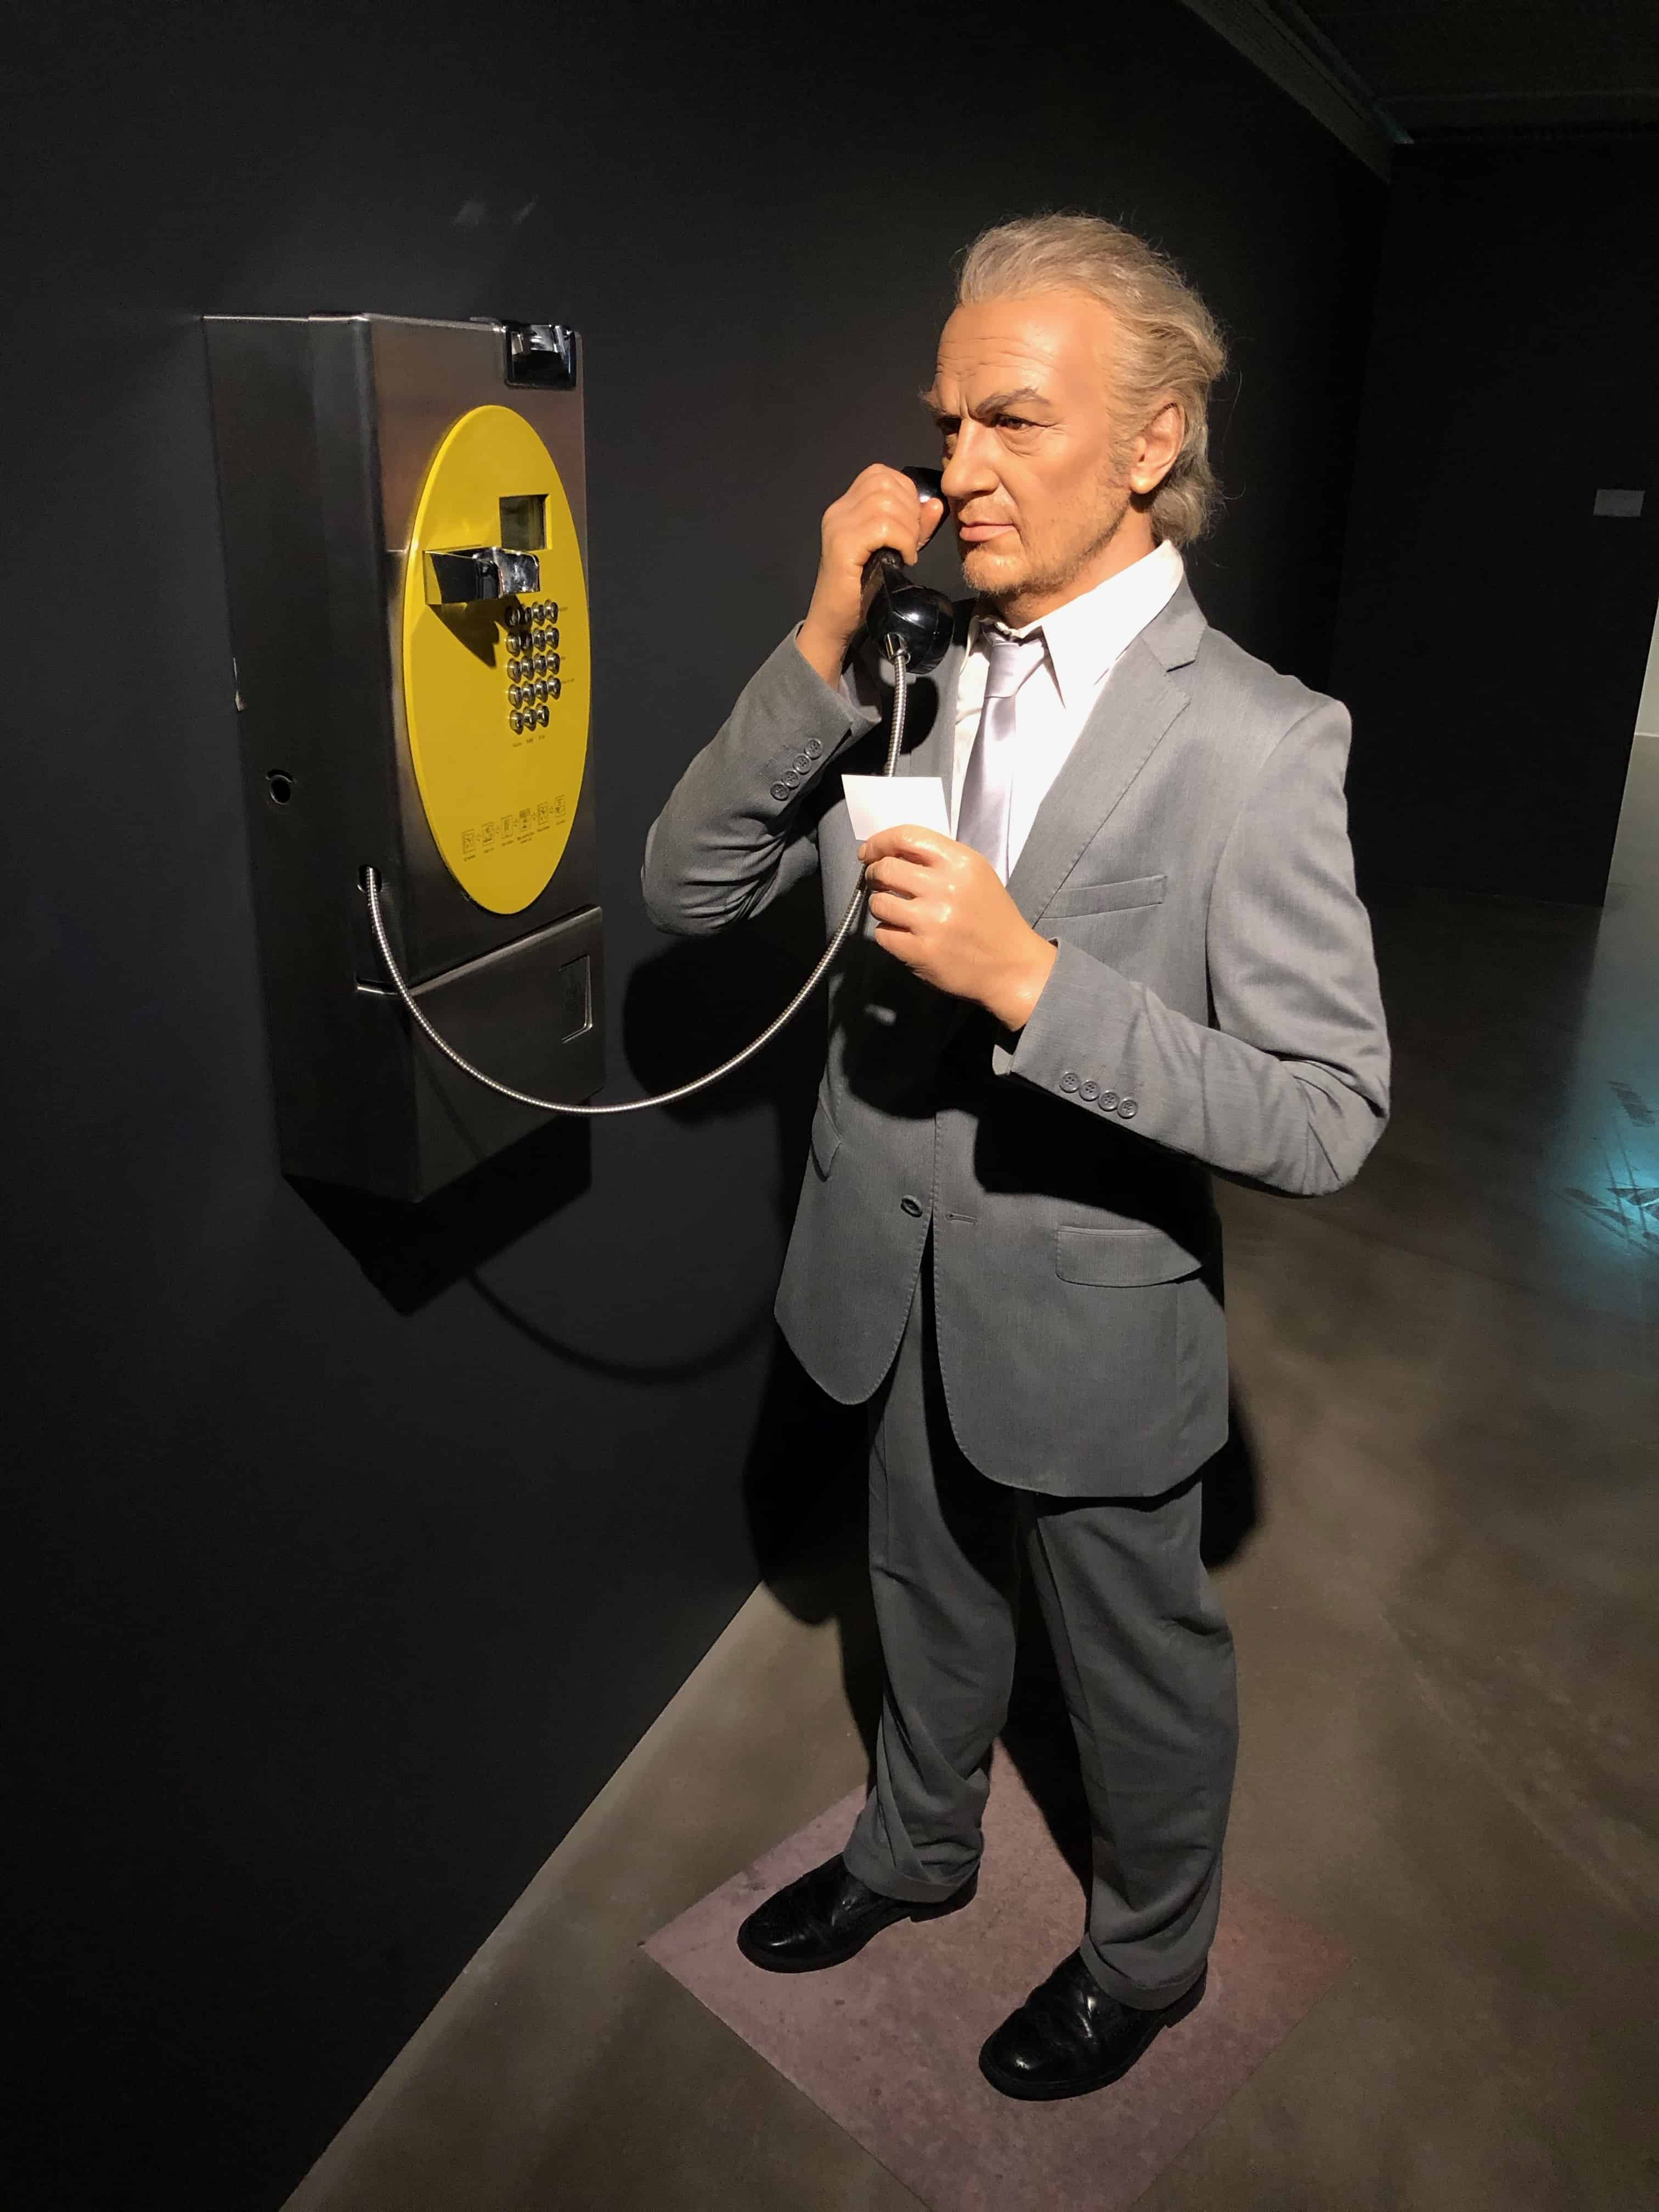 Telephone Call from Istanbul (2019) by Halil Altındere at Yapı Kredi Cultural Center in Istanbul, Turkey